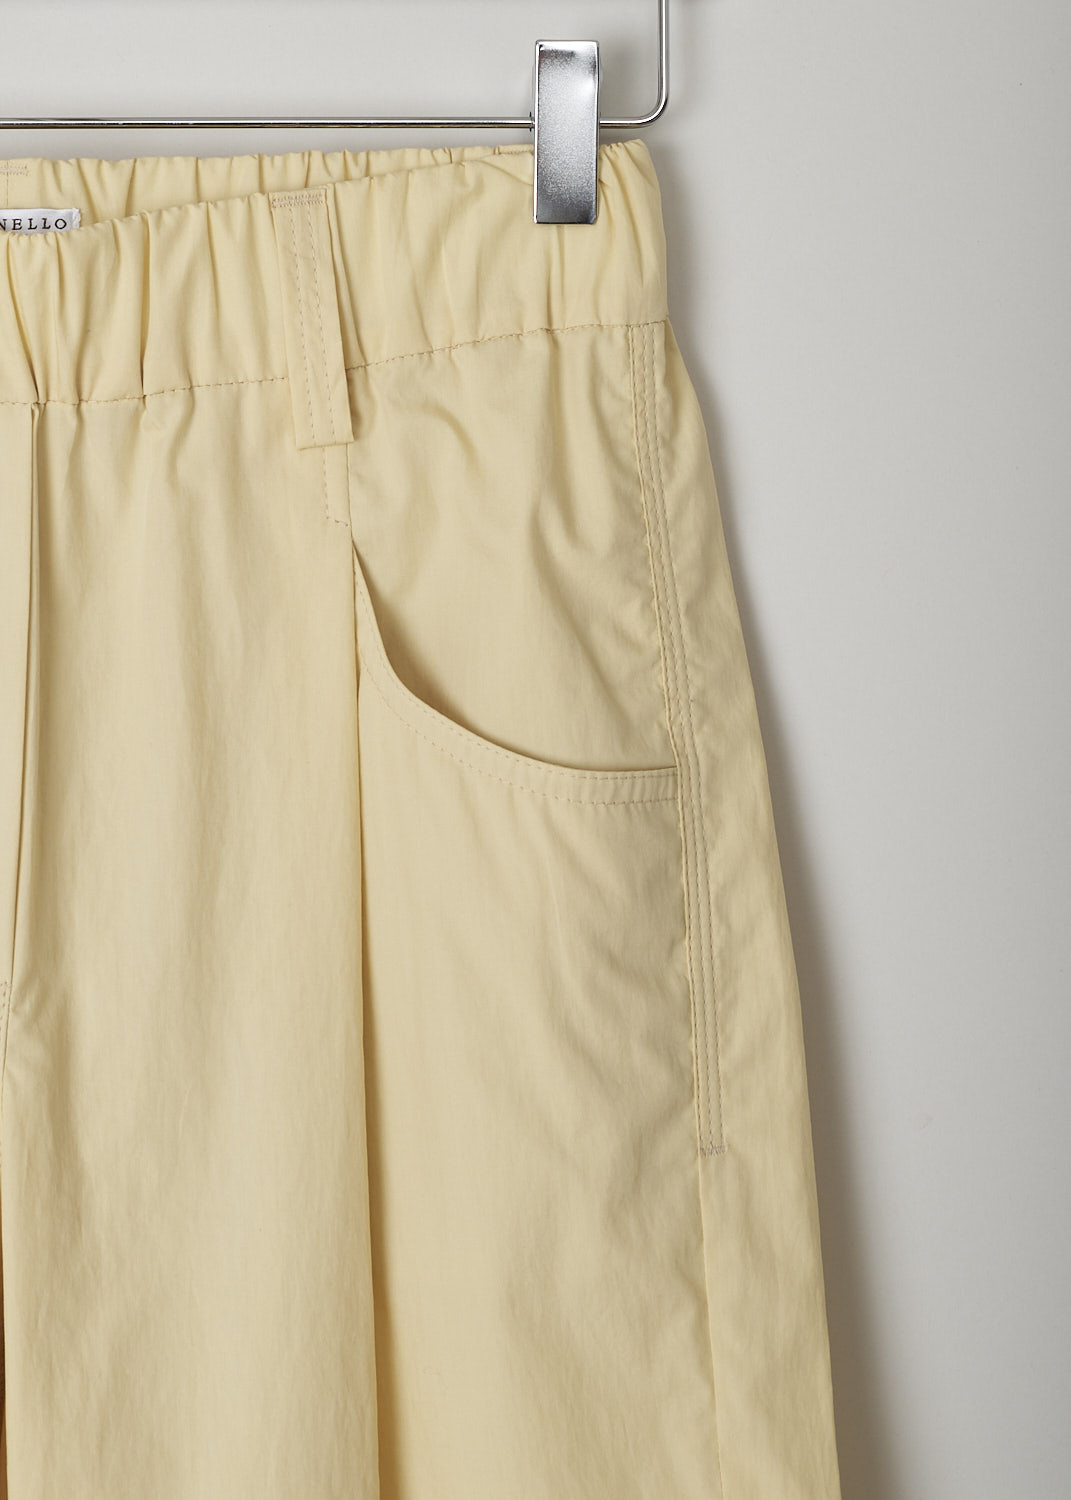 BRUNELLO CUCINELLI, PALE YELLOW SLIP-ON PANTS, M0H93P7894_C8612, Yellow, Detail, These pale yellow high-waisted slip-on pants have an elasticated waistband with belt loops and a mock-fly stitched on the front. These pants have a traditional five pocket configuration, with two pockets and a single coin pocket in the front and two patch pockets in the back. The straight cropped pant legs have front pleats.  
